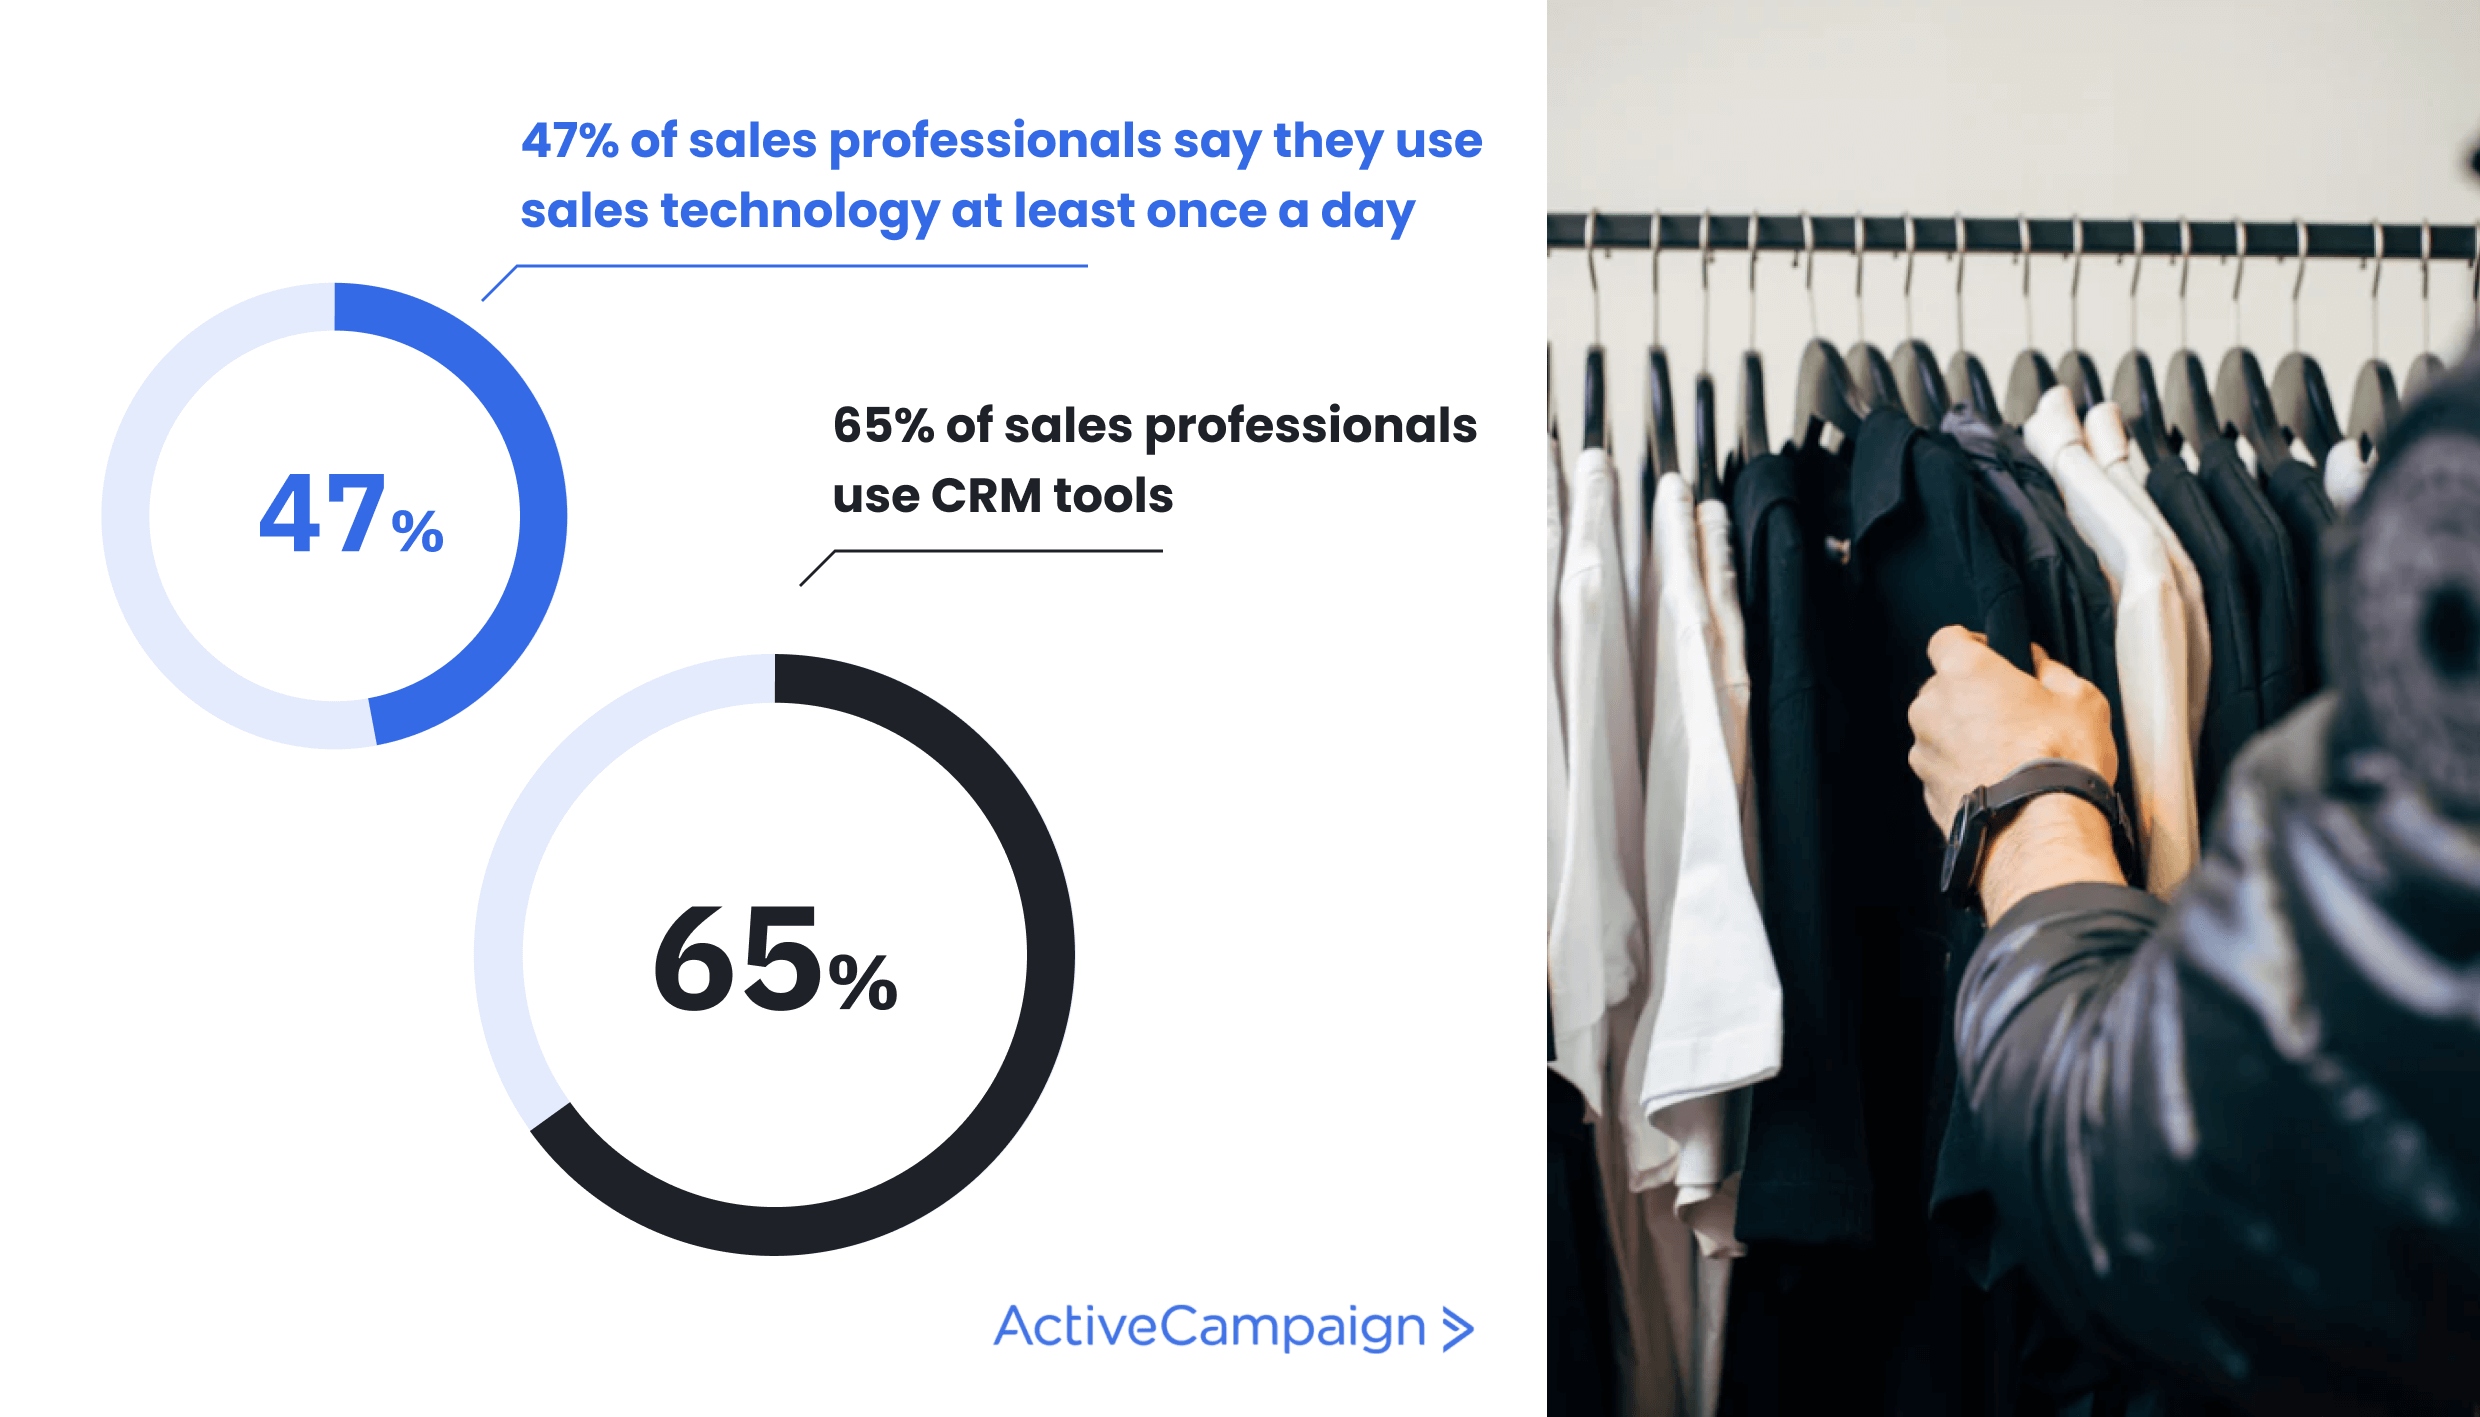 Graphic showing that 65% of salespeople use CRM tools, and 47% use sales technology daily.